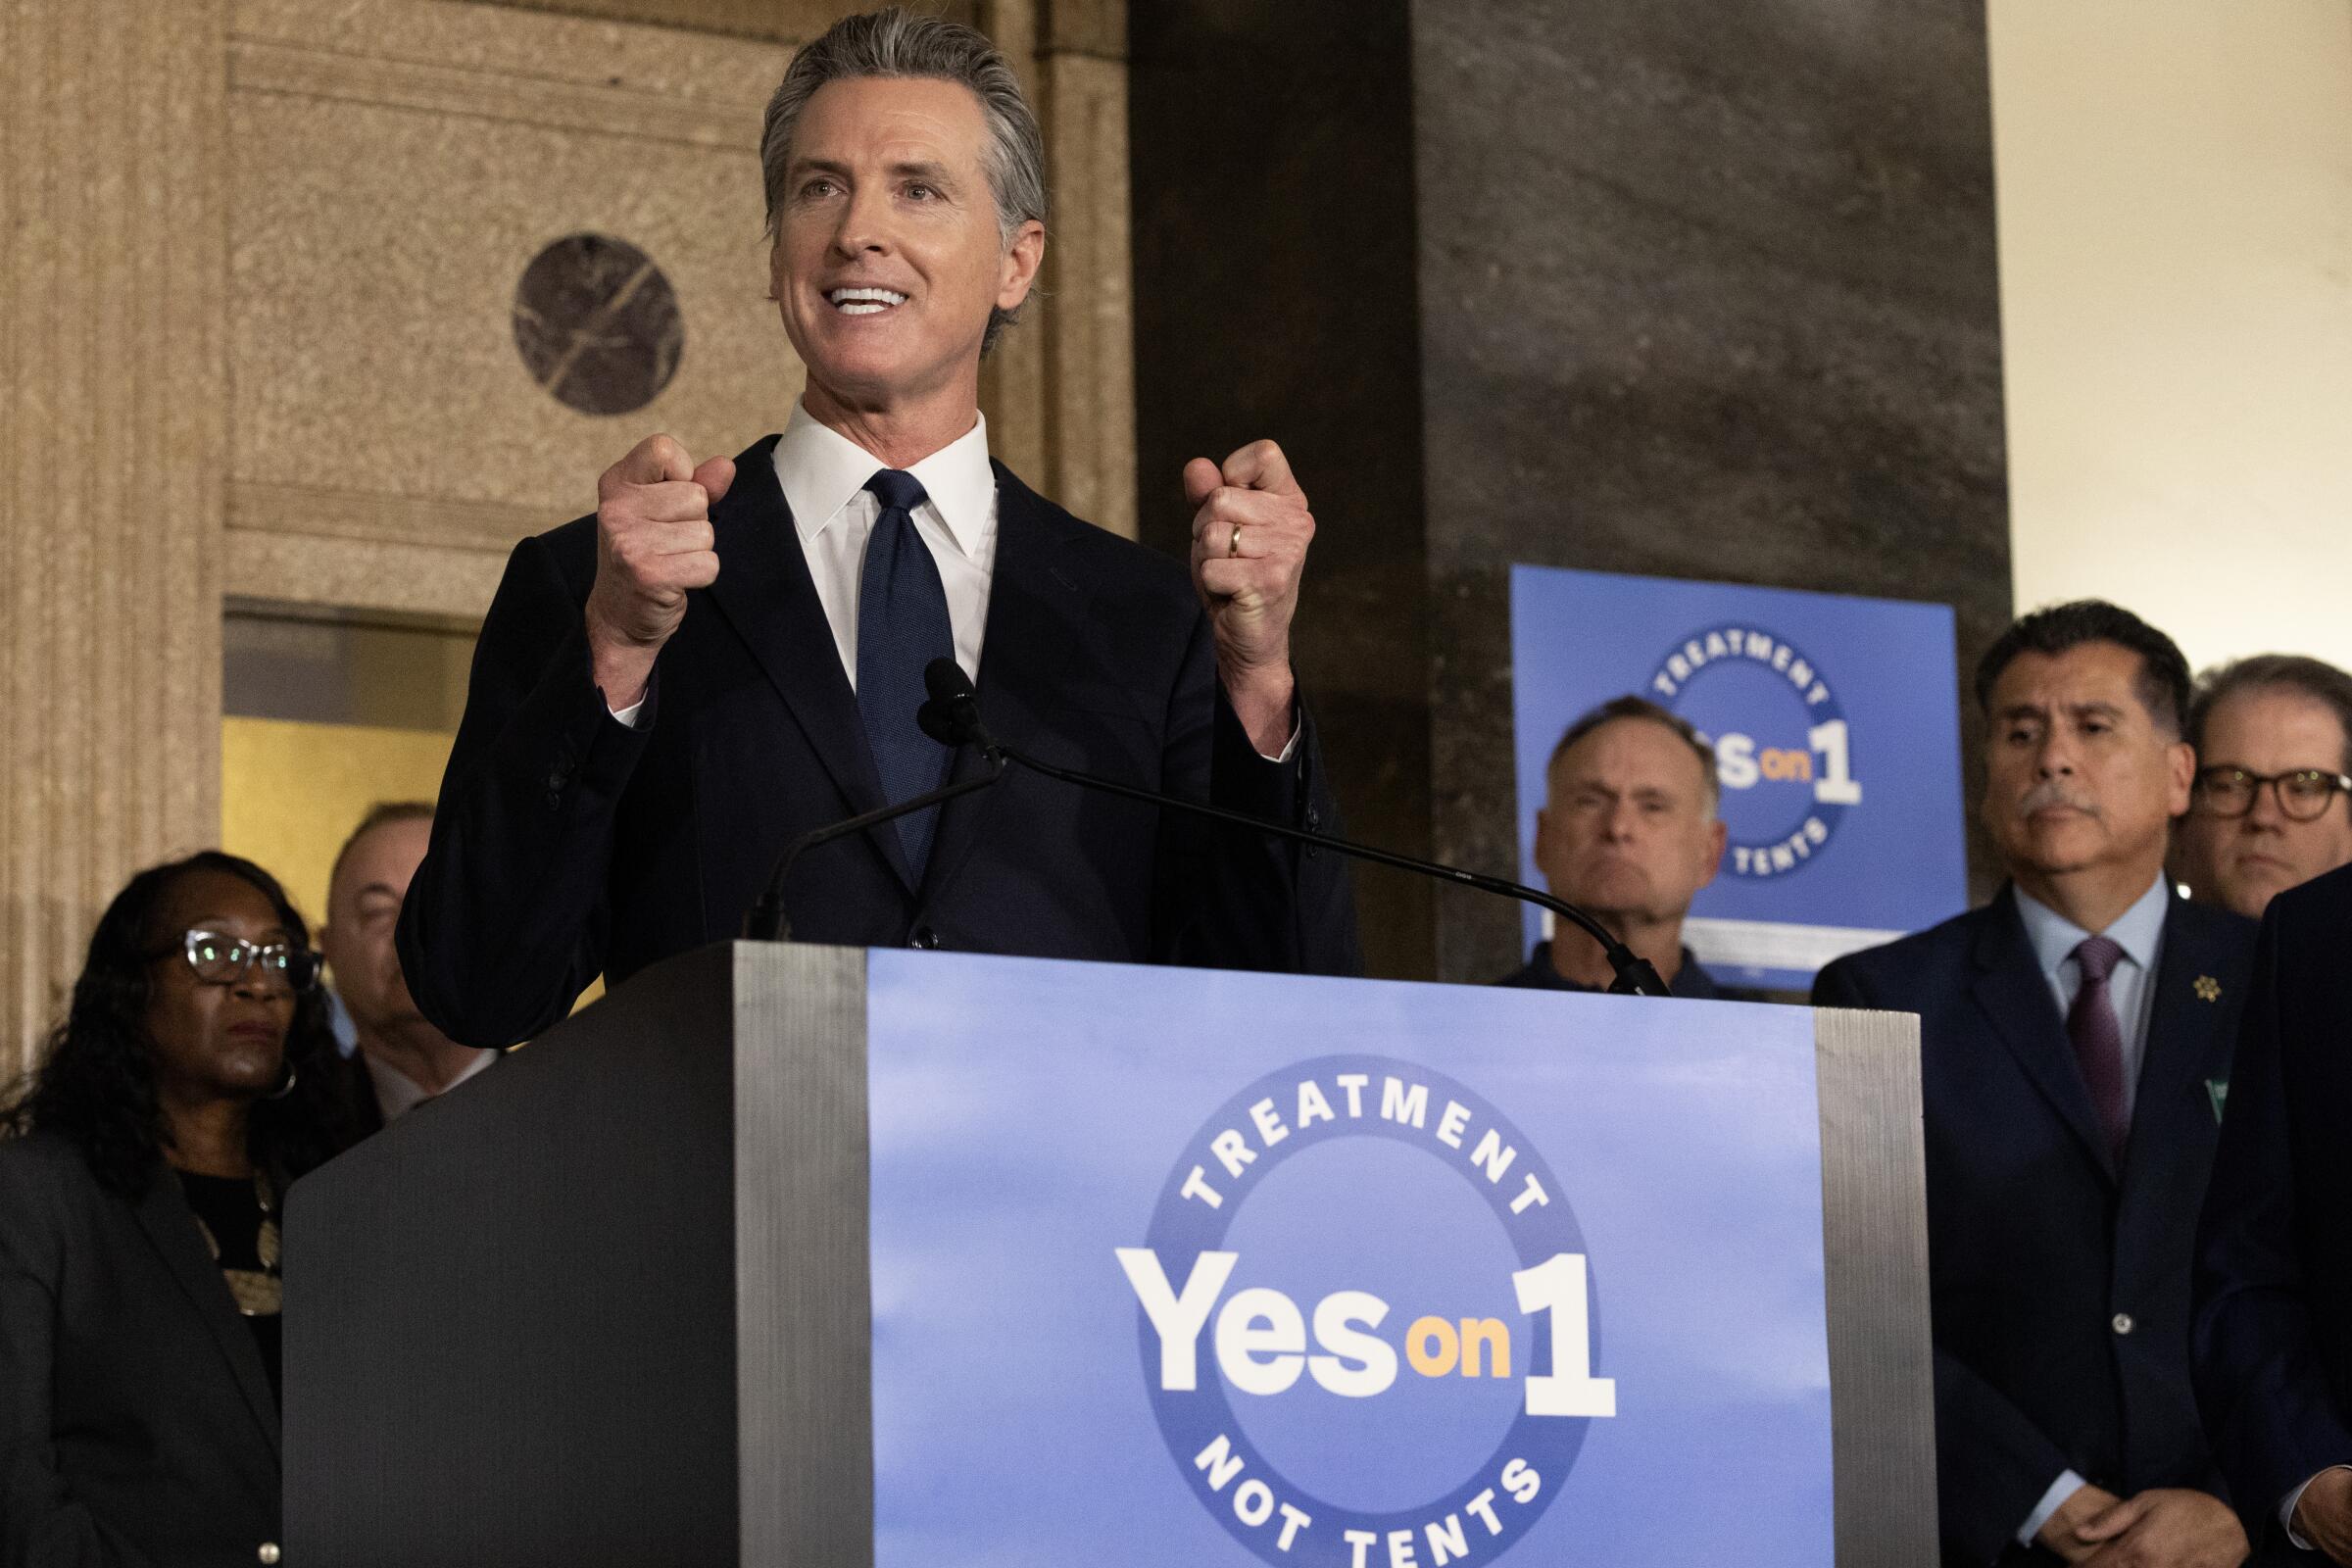 Gov. Gavin Newsom standing in front of a podium that has a blue sign that reads "Yes on 1"